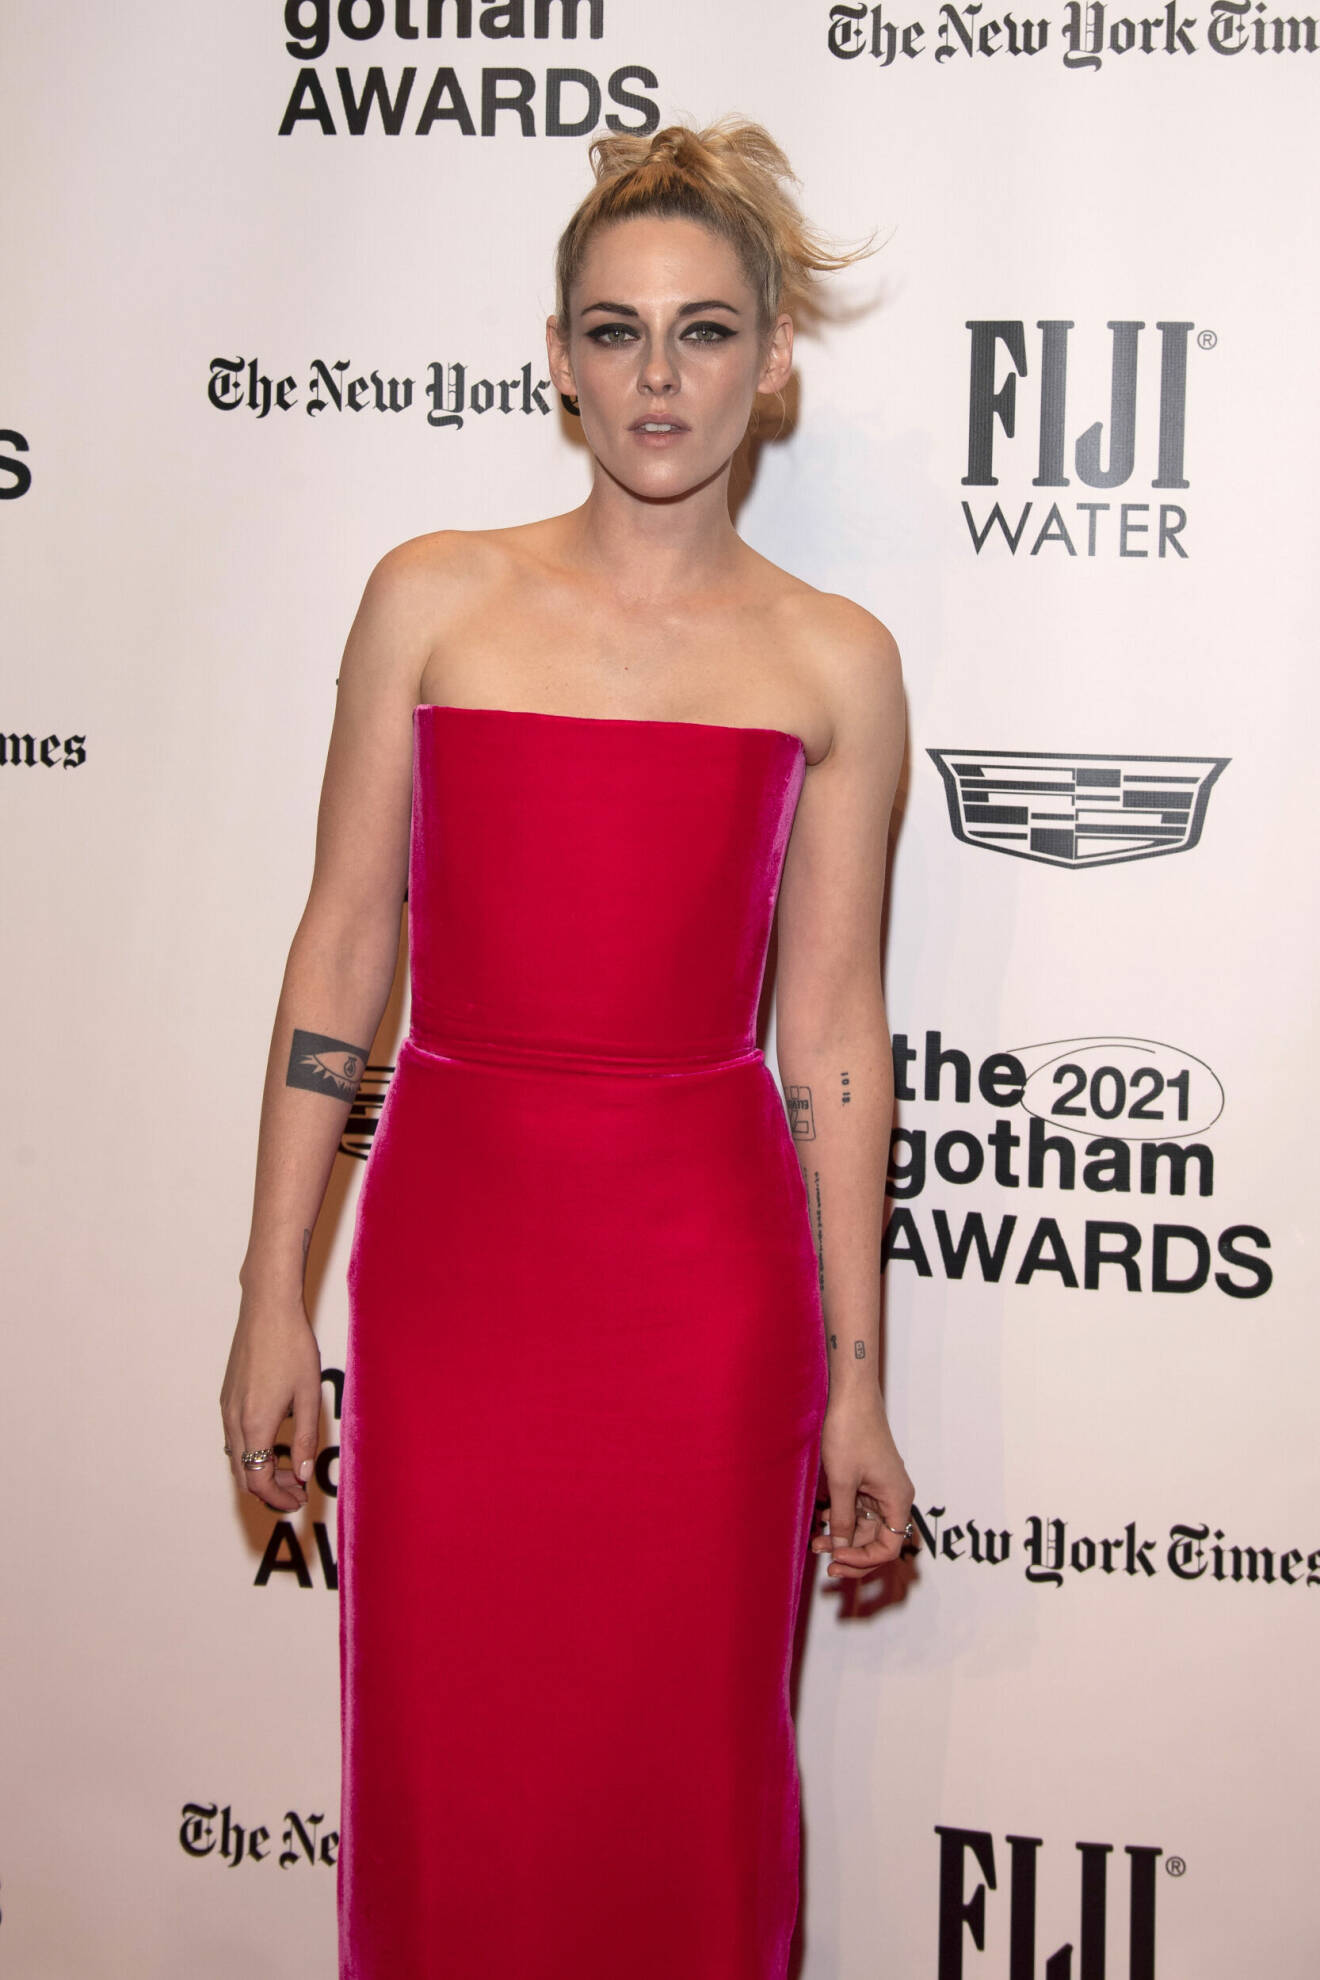 <font style="vertical-align: inherit;"><font style="vertical-align: inherit;">Kristen Stewart</font></font>